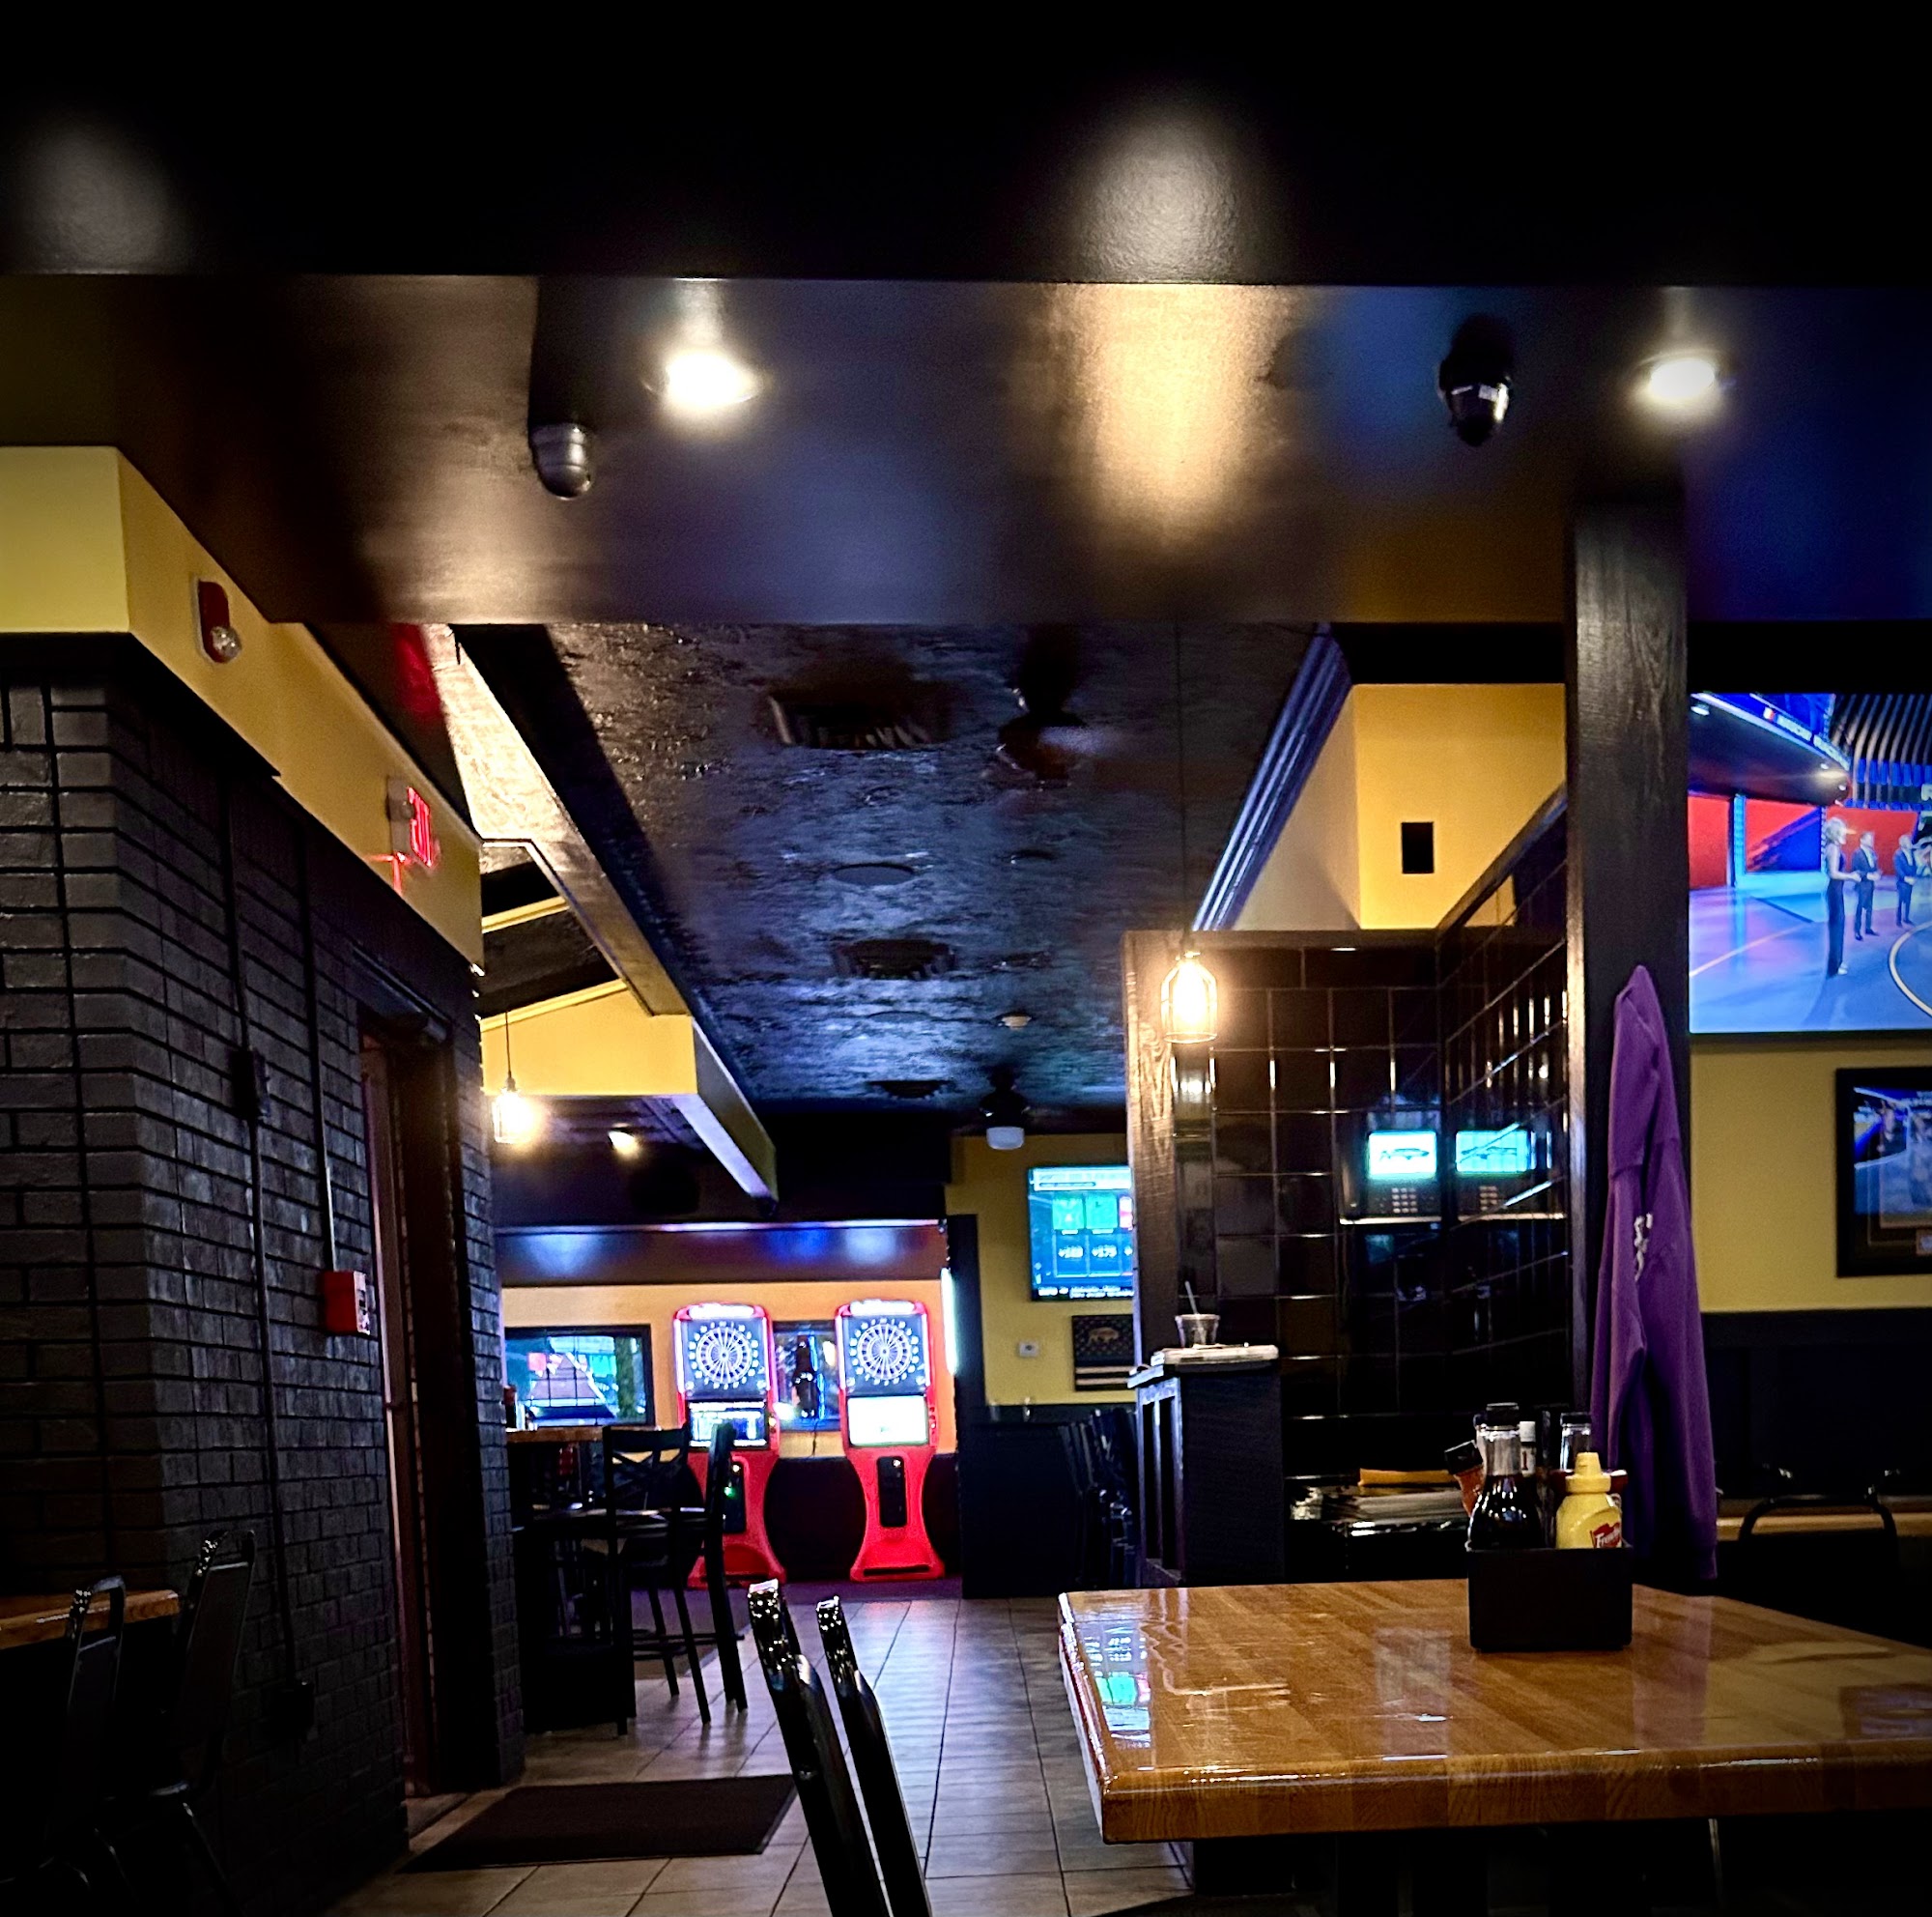 Sidelines Sports Bar and Grill